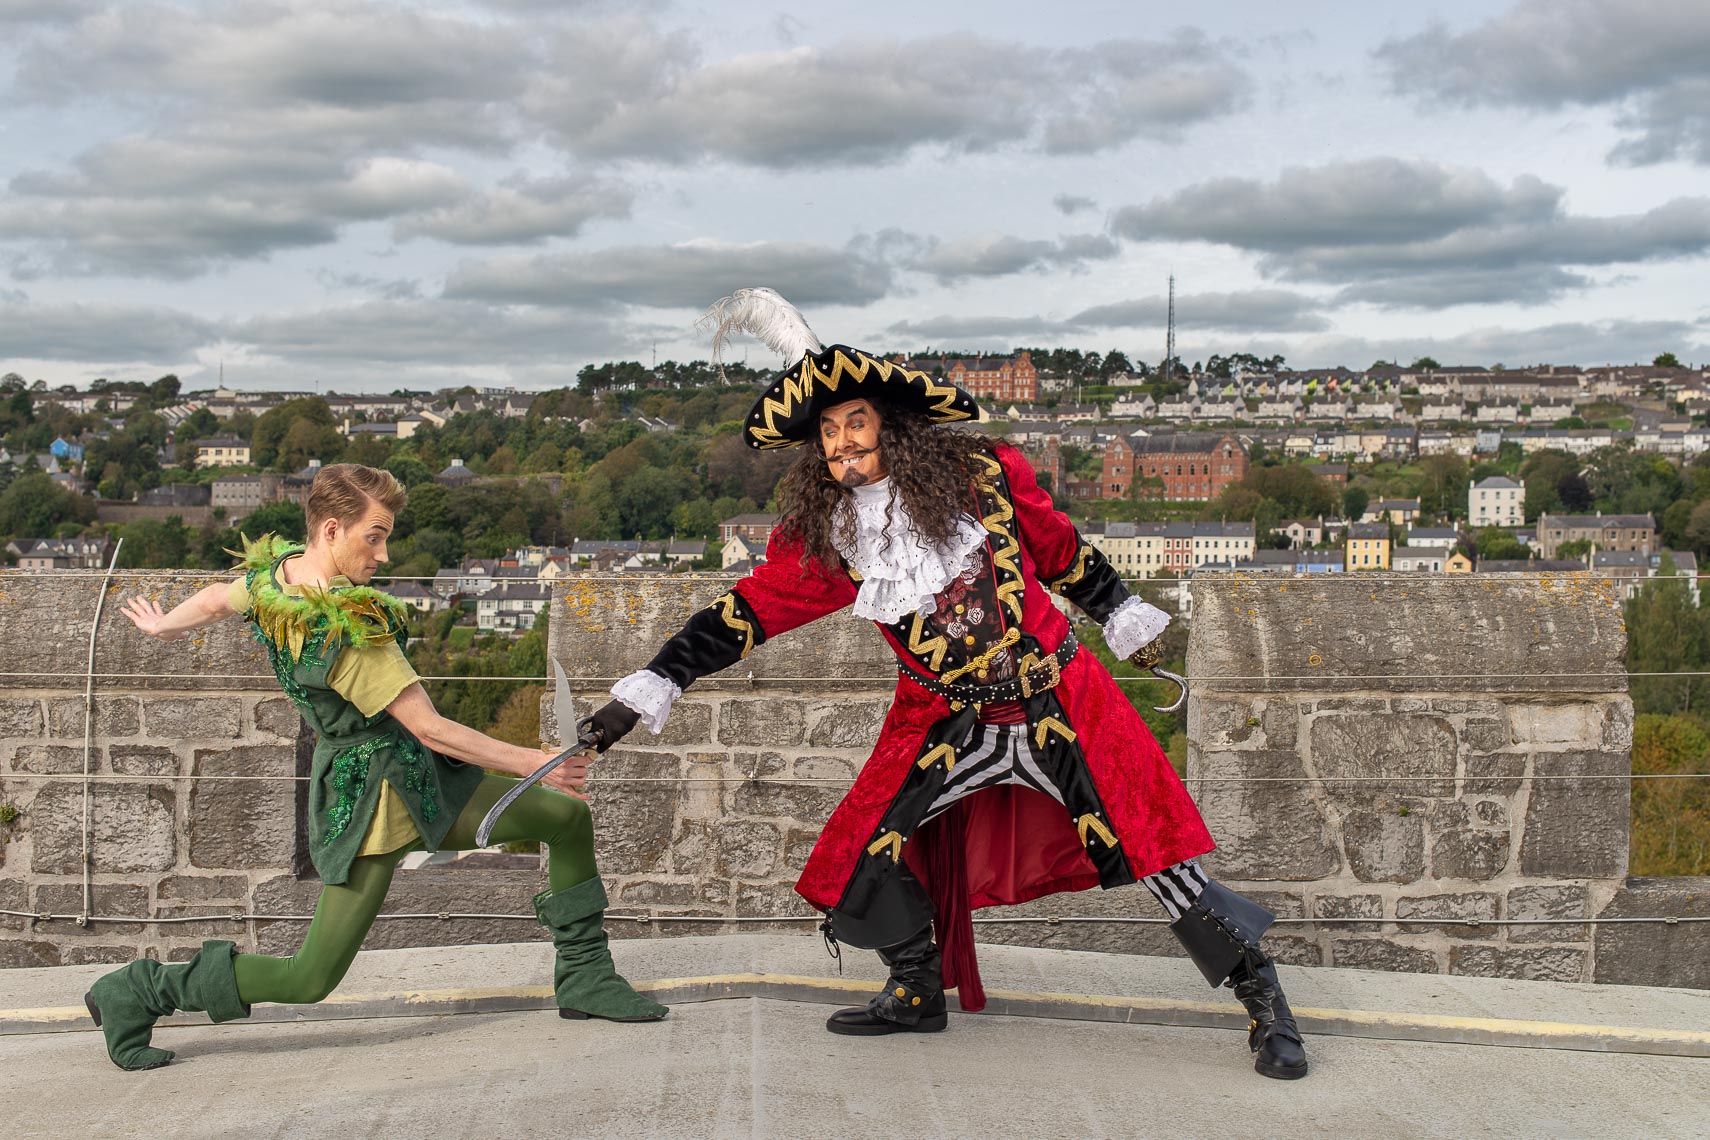 Scott Hayward as Peter Pan and Michael Grennell as Hook.